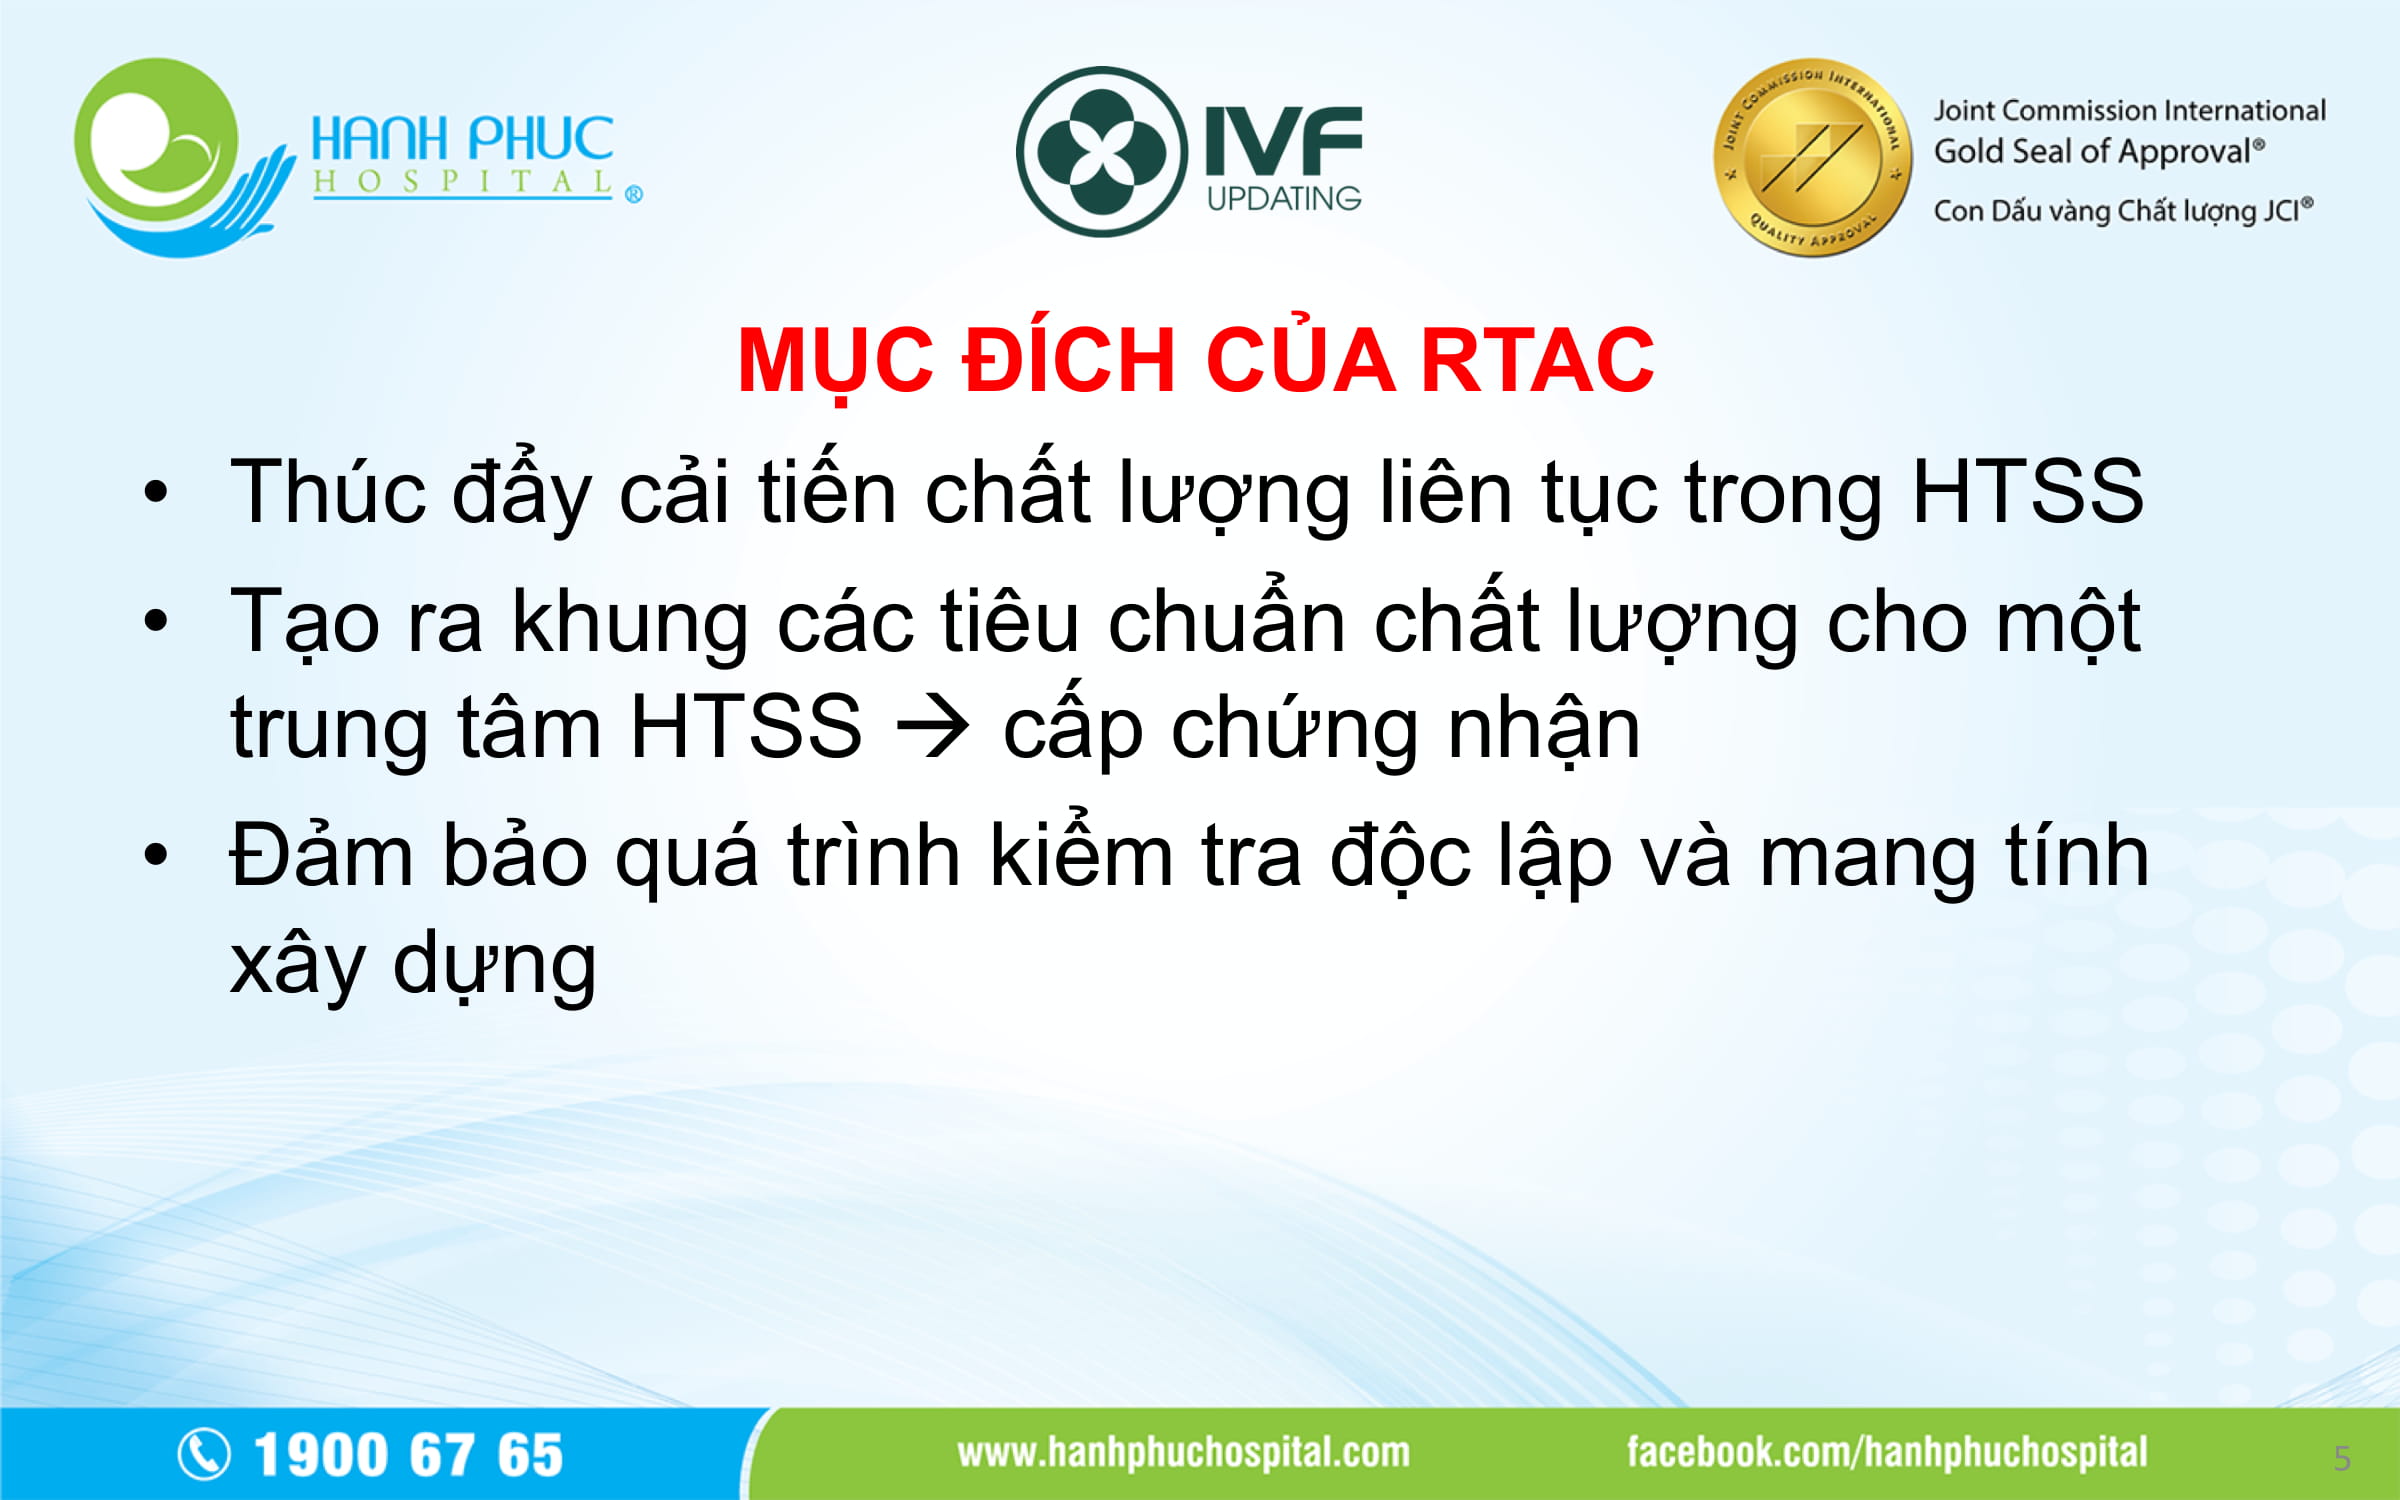 BS Vo Thien An Report_IVF UPDATING 5-05